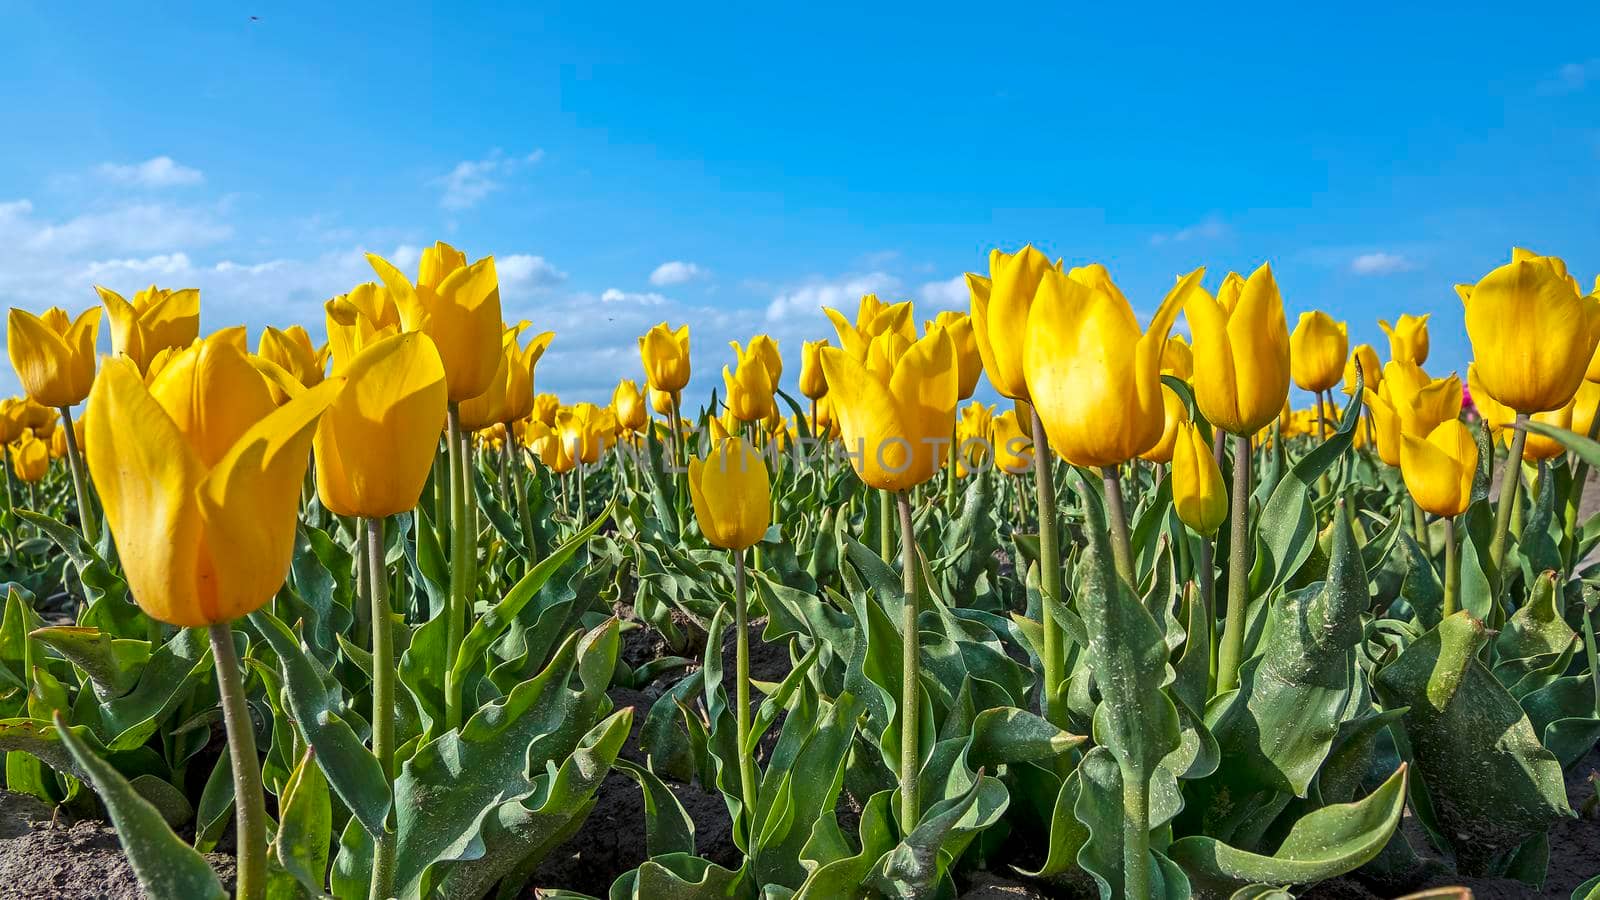 Blossoming yellow tulips in the countryside from the Netherlands by devy